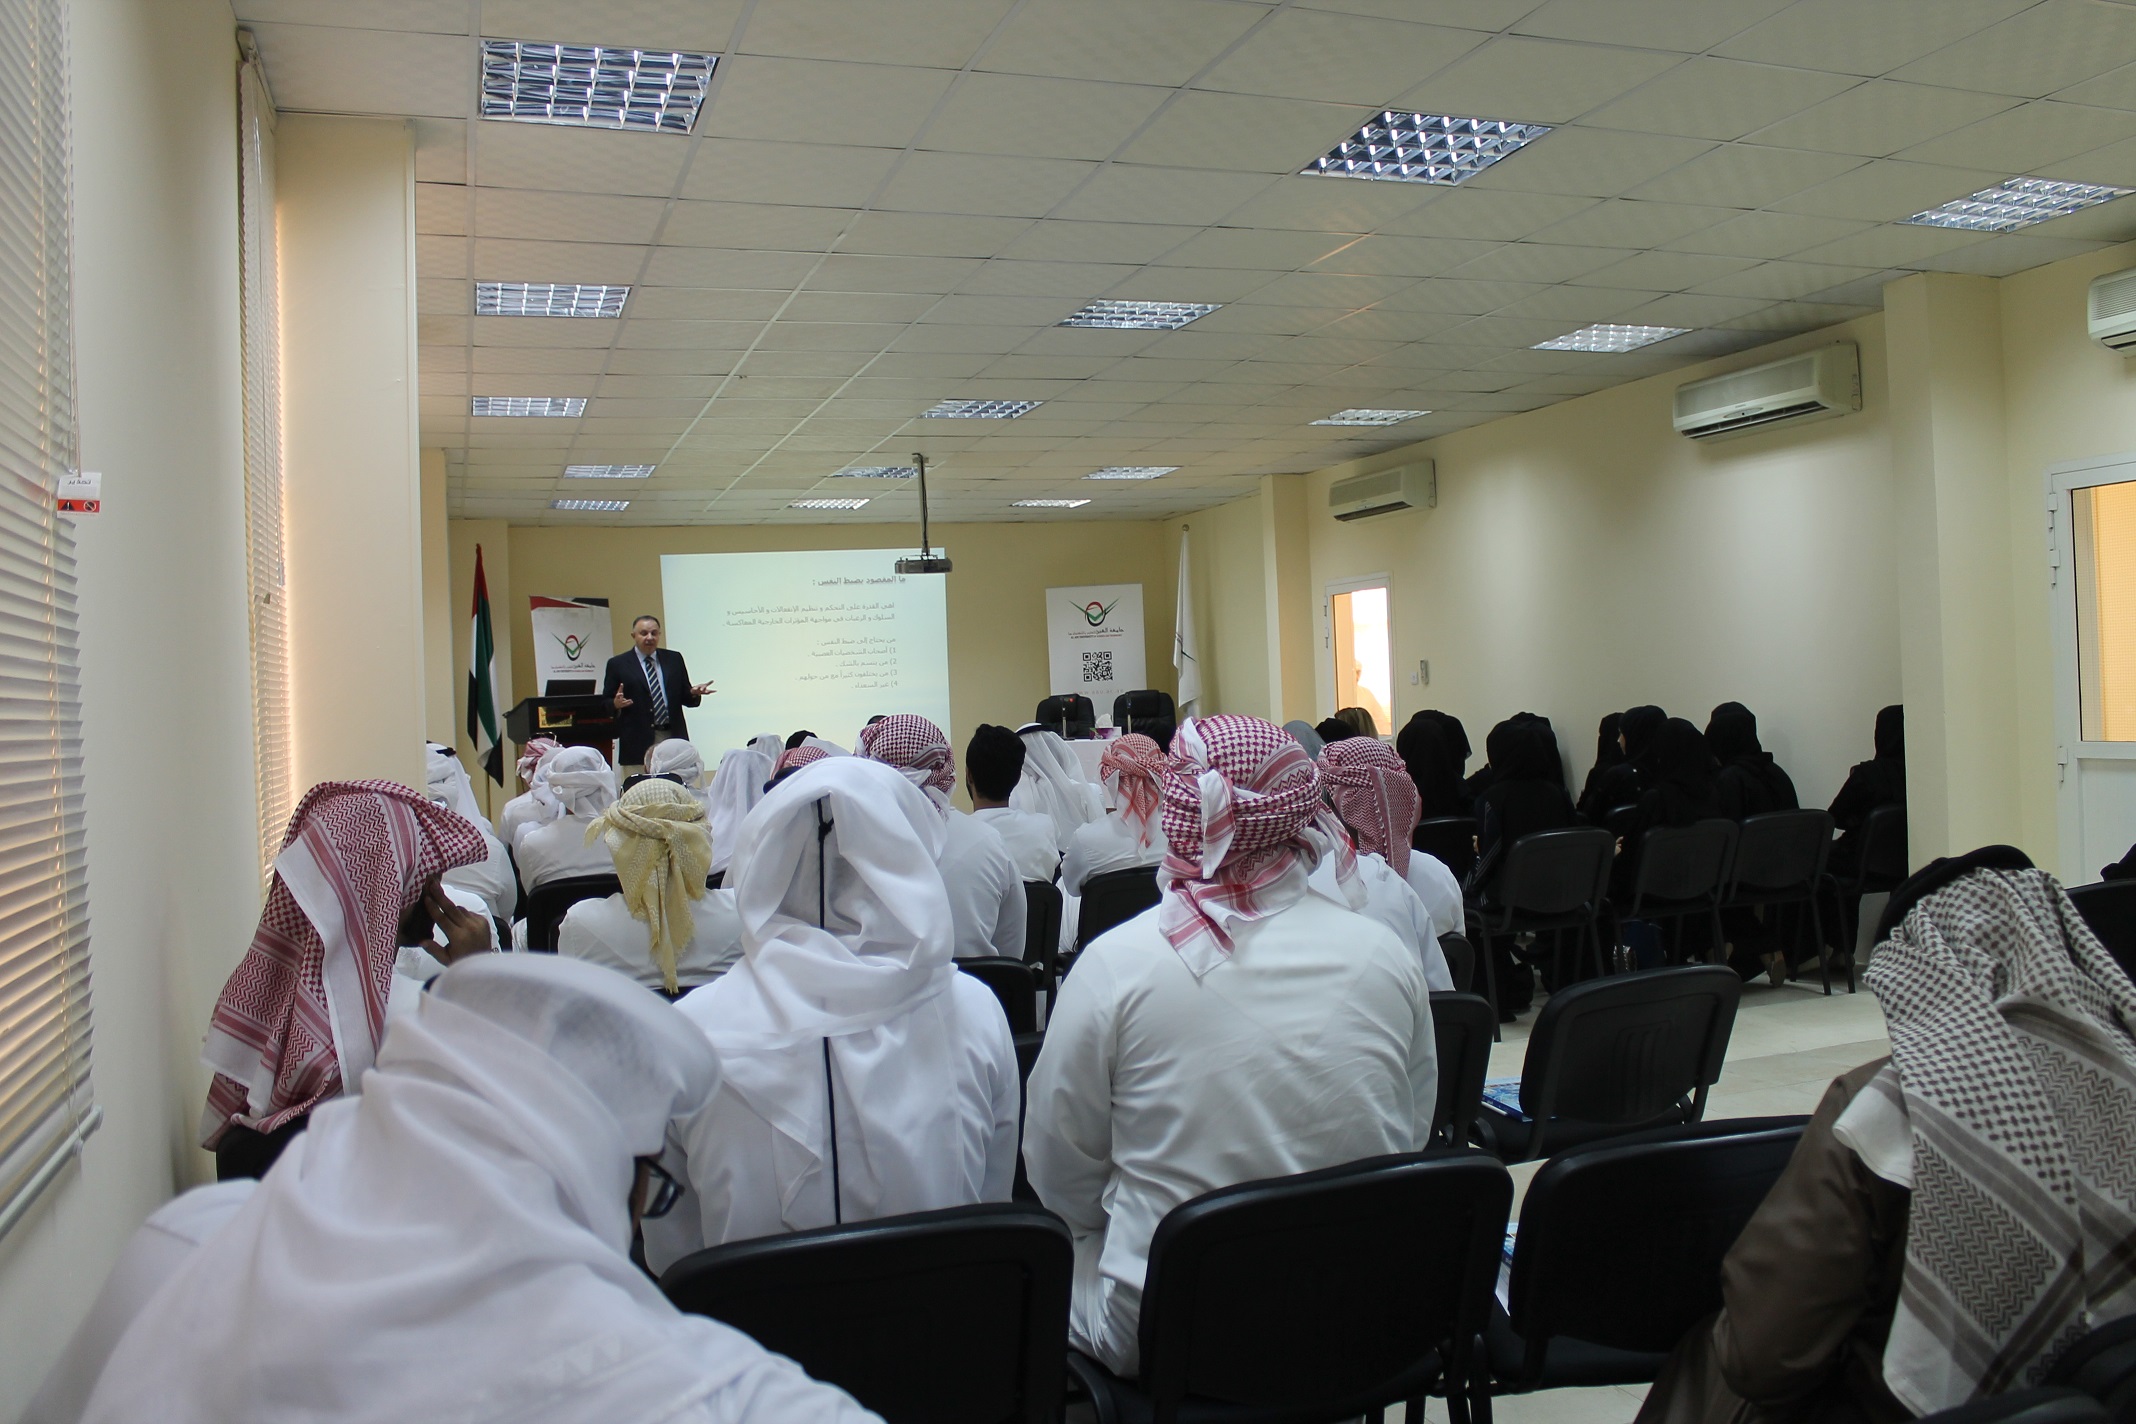 Talk on "The Balance Between Reason and Emotion" in Al Ain University